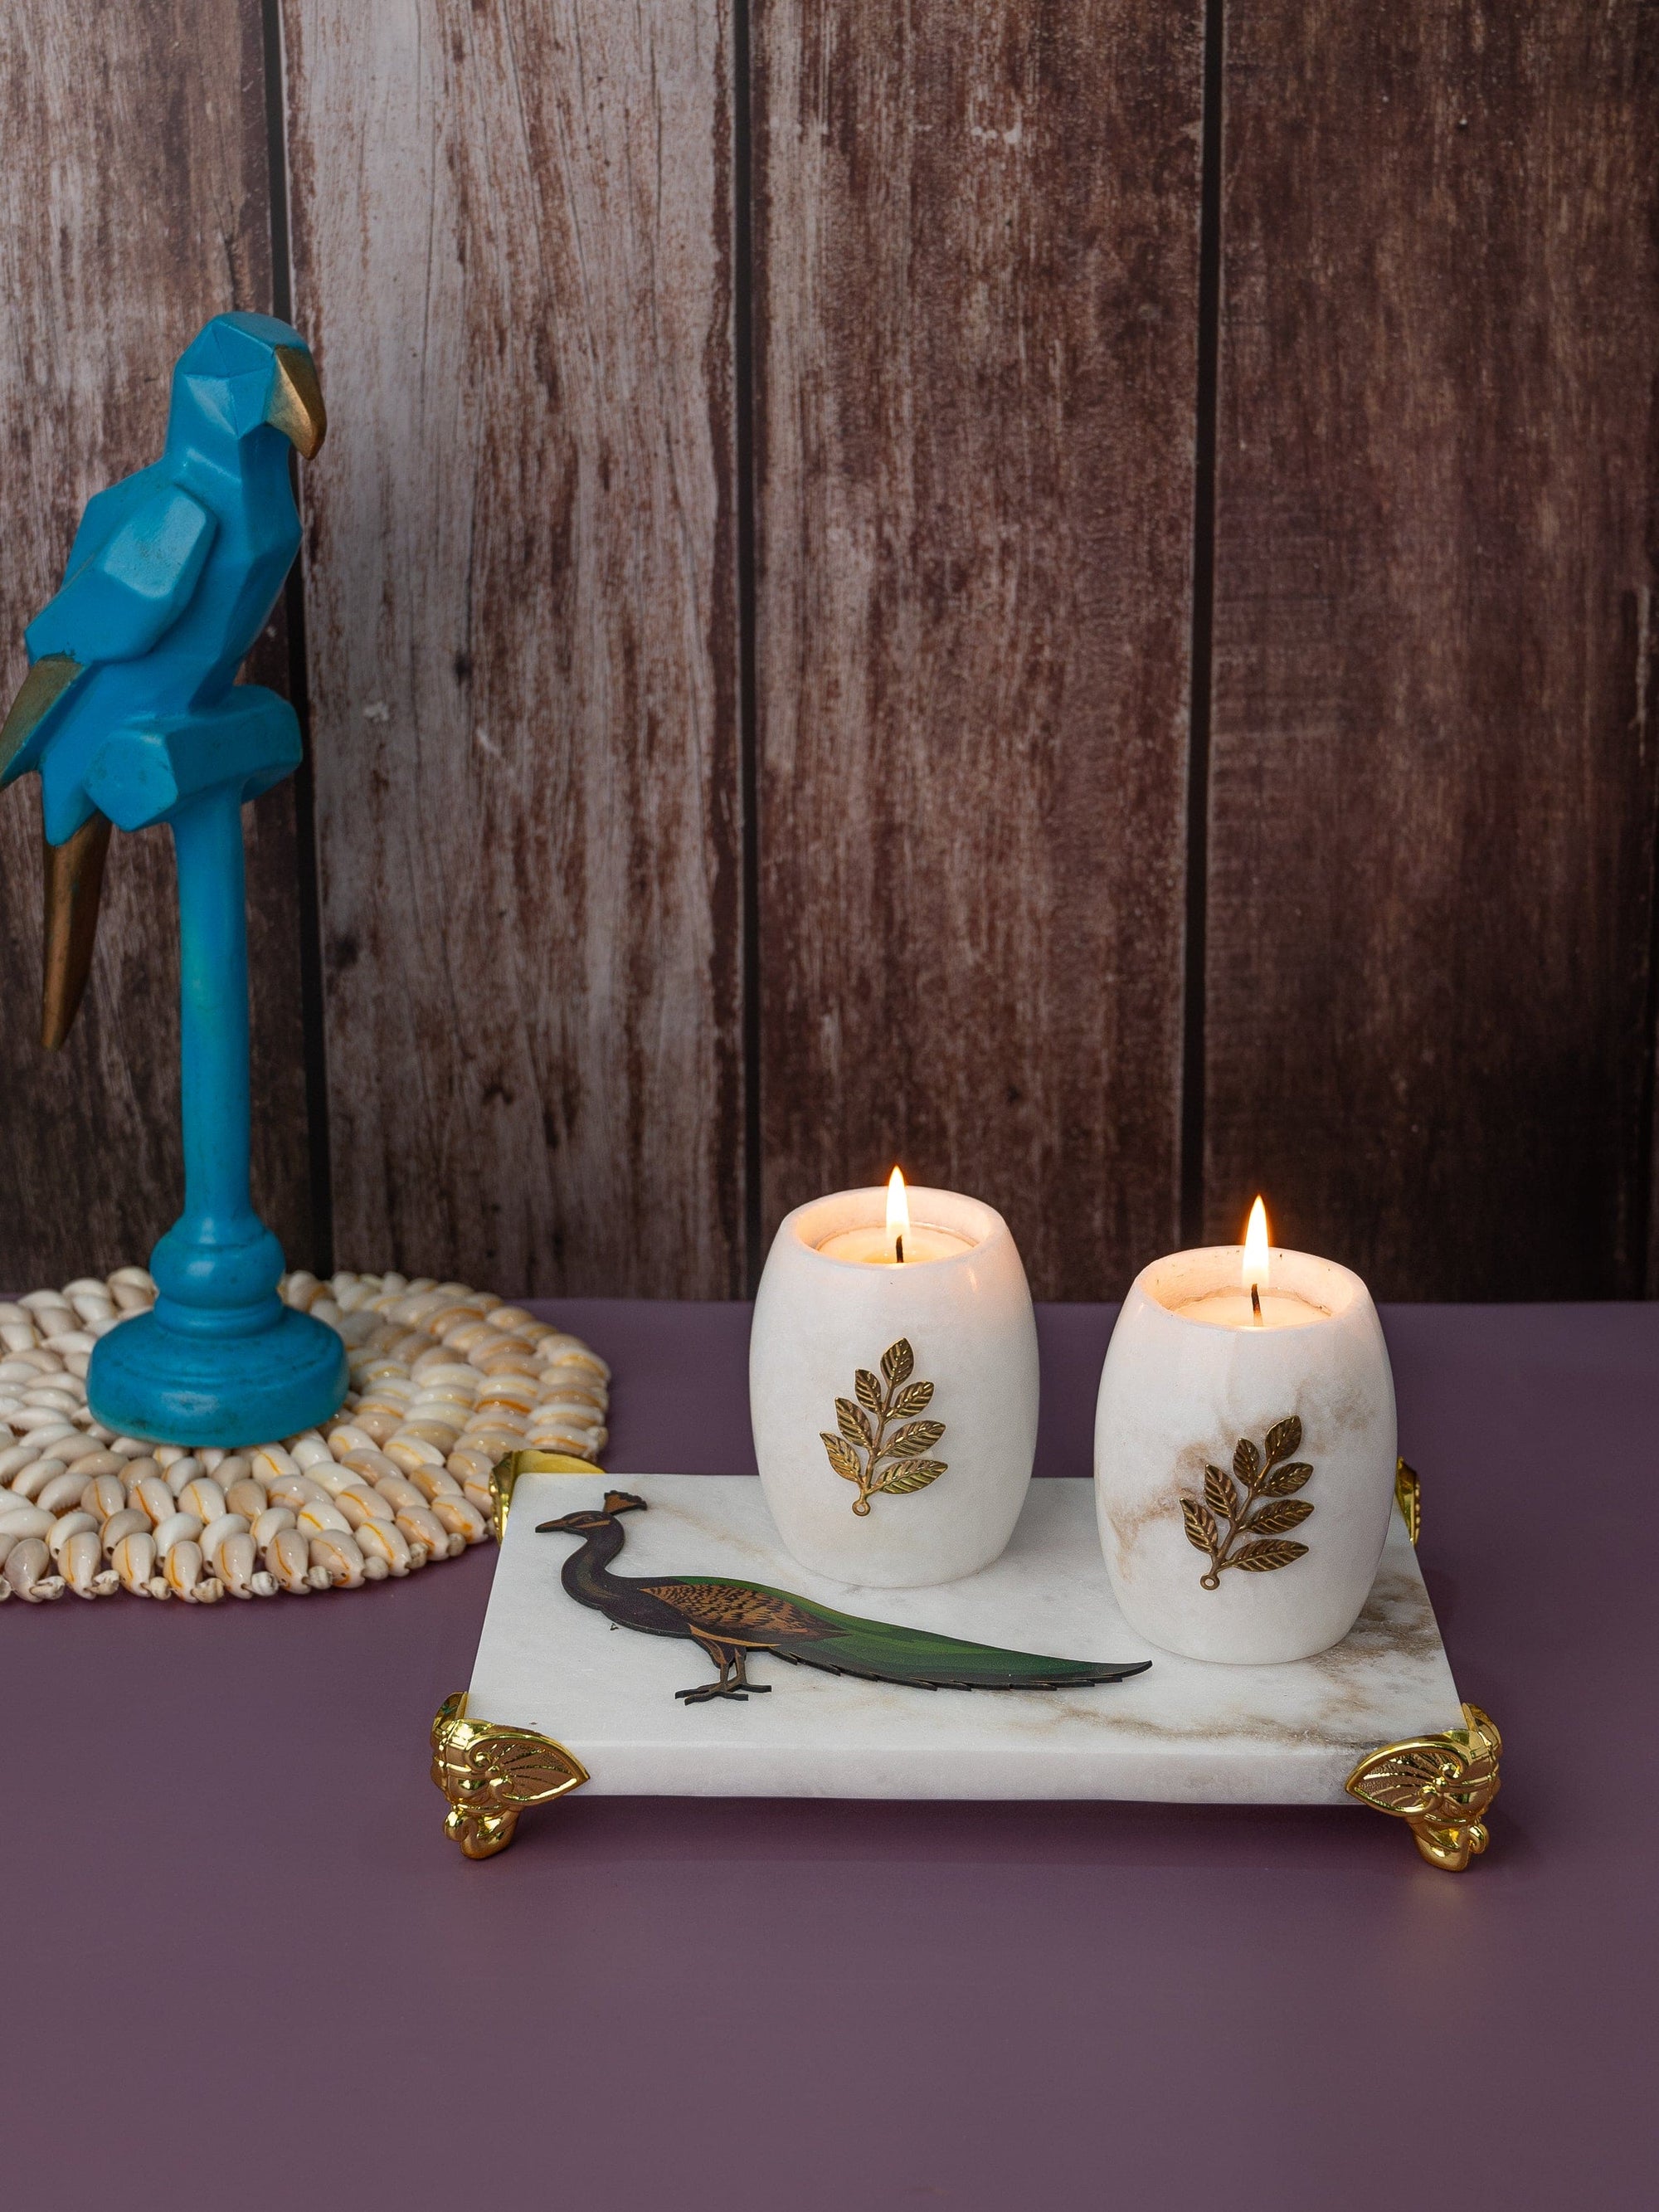 Set of 2 Tea light Candle Holders in a Rectangular Peacock Tray with Golden Legs